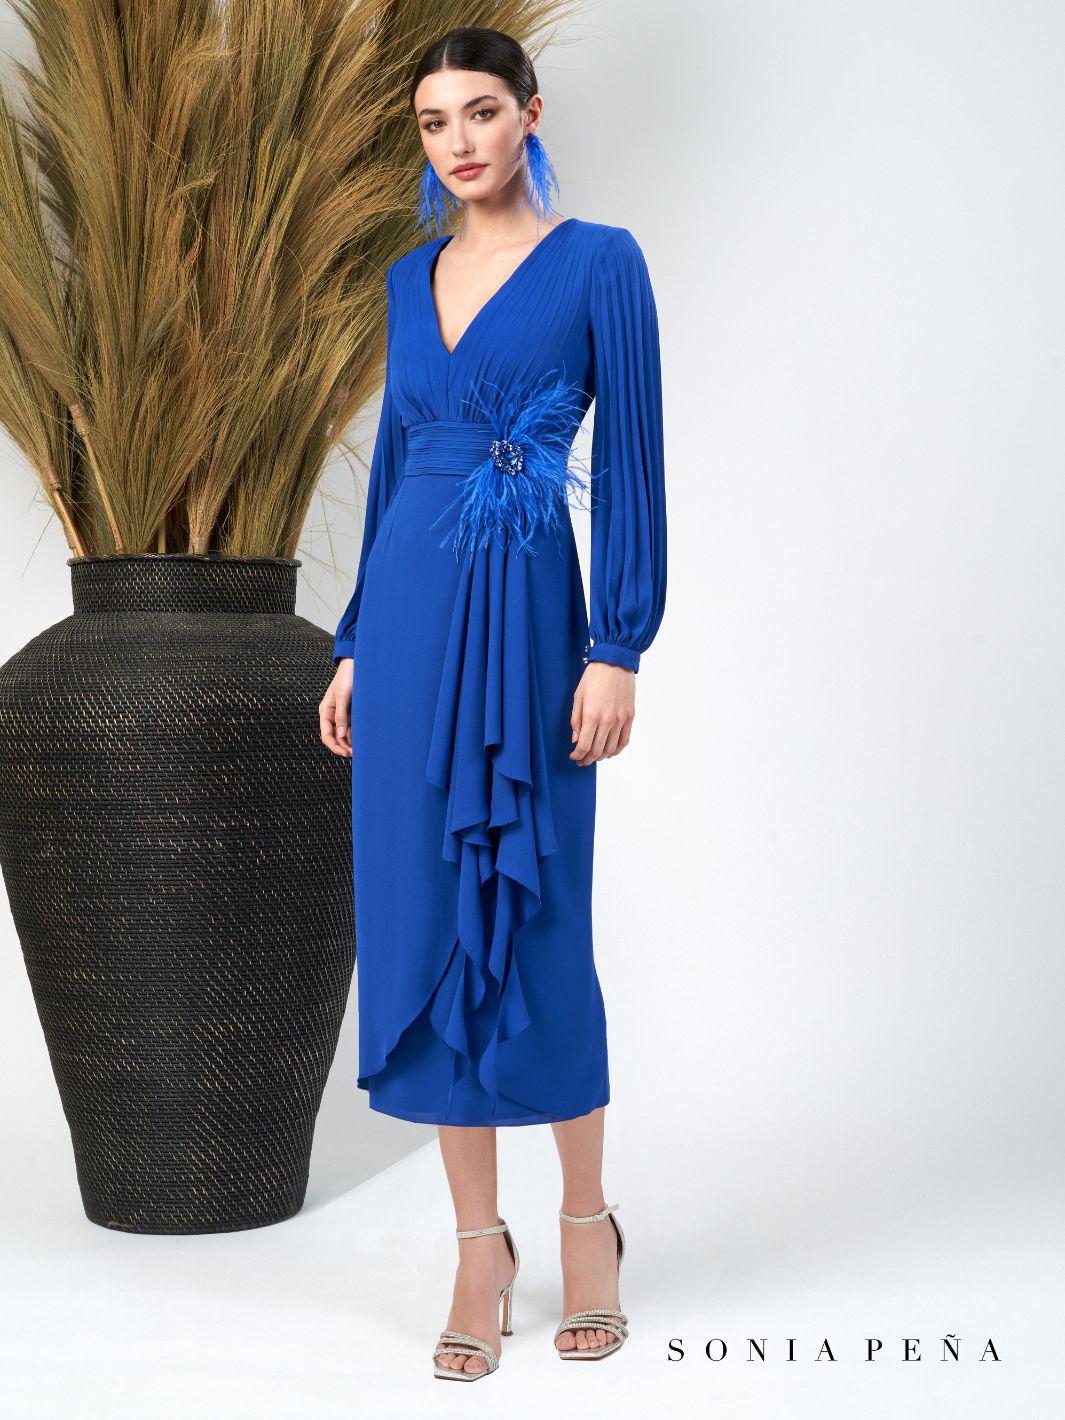 Sonia Pena Dress 11240005A In Blue-Mother of the bride- mother of the groom -Nicola Ross